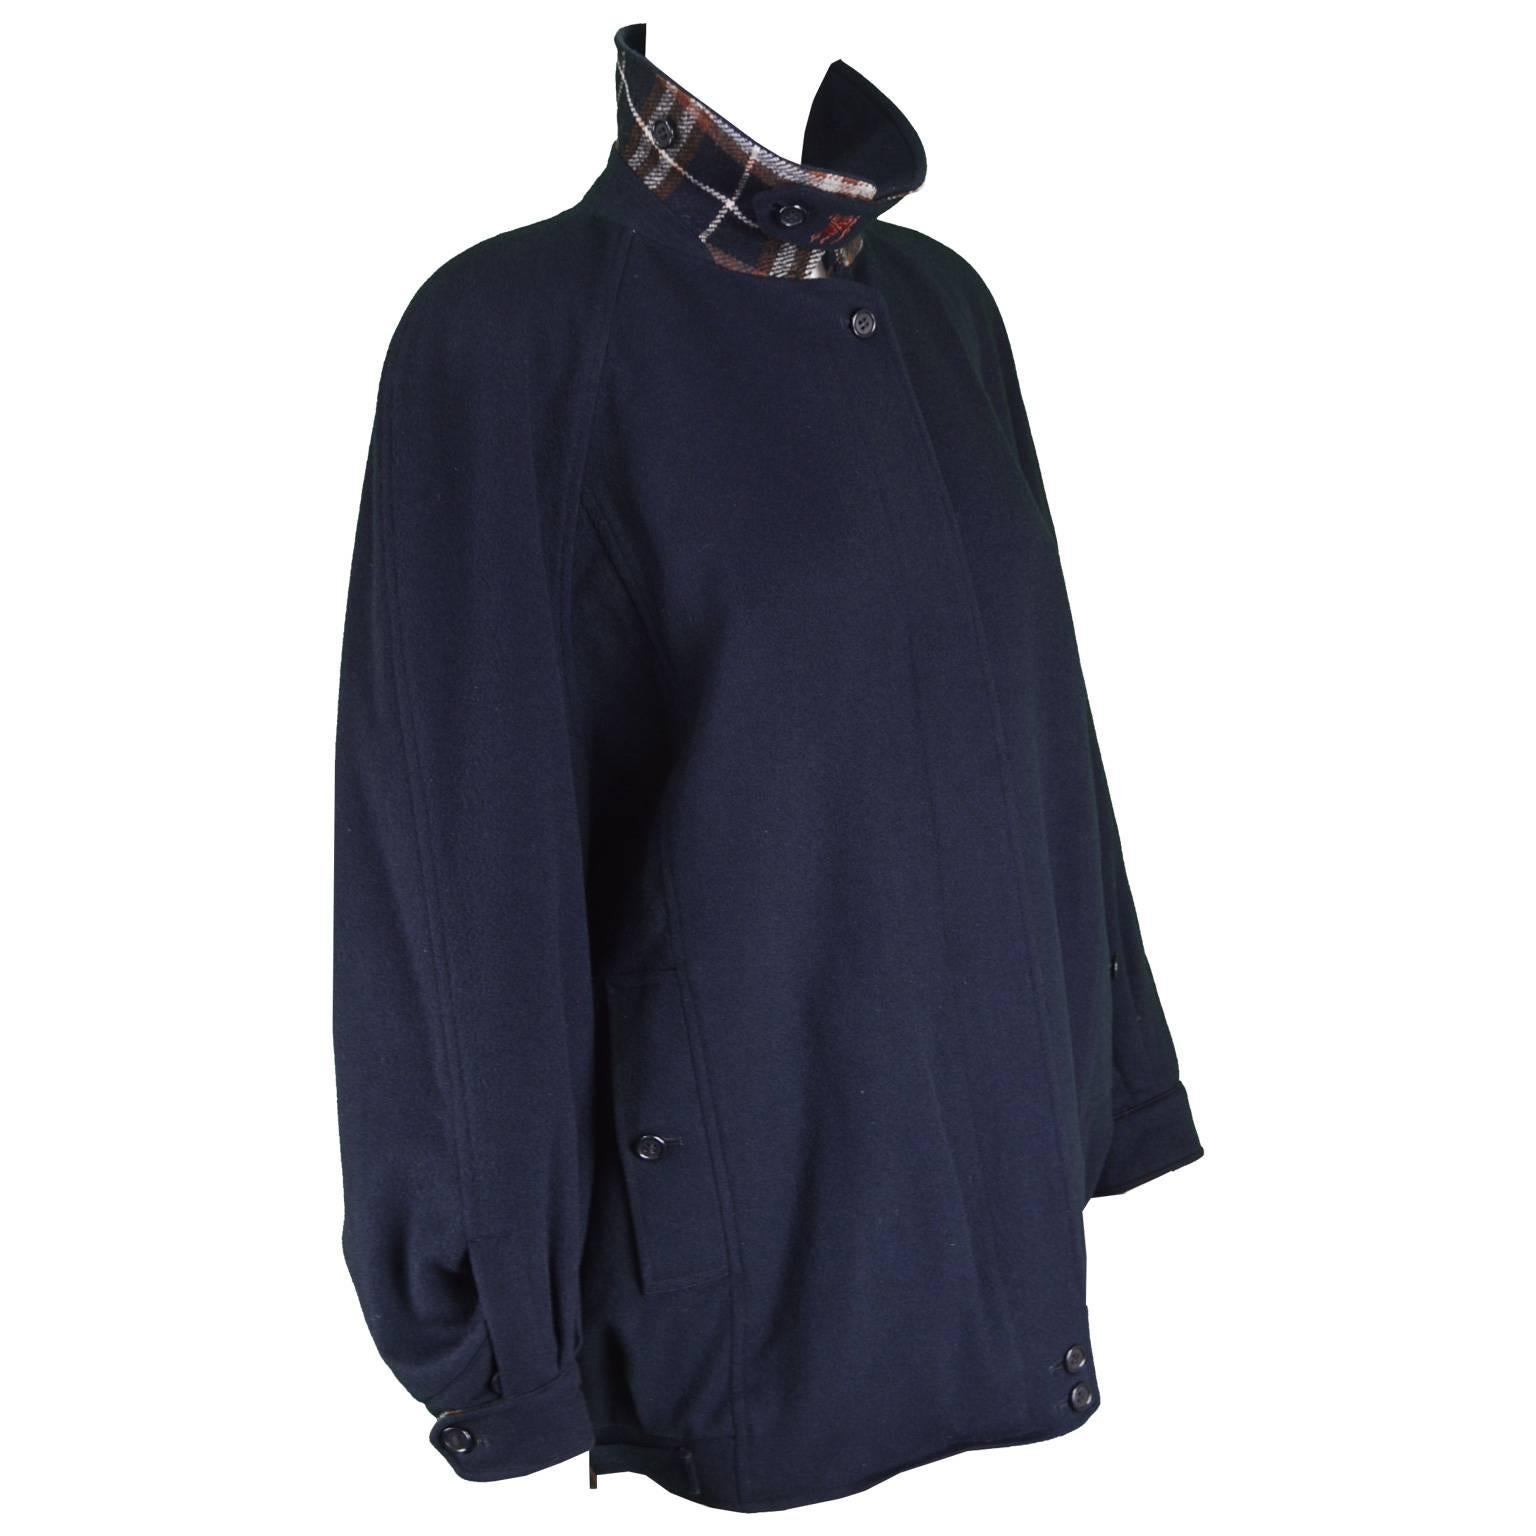 Burberry Navy Blue Alpaca and Wool Embroidered Women's Bomber Jacket, 1980